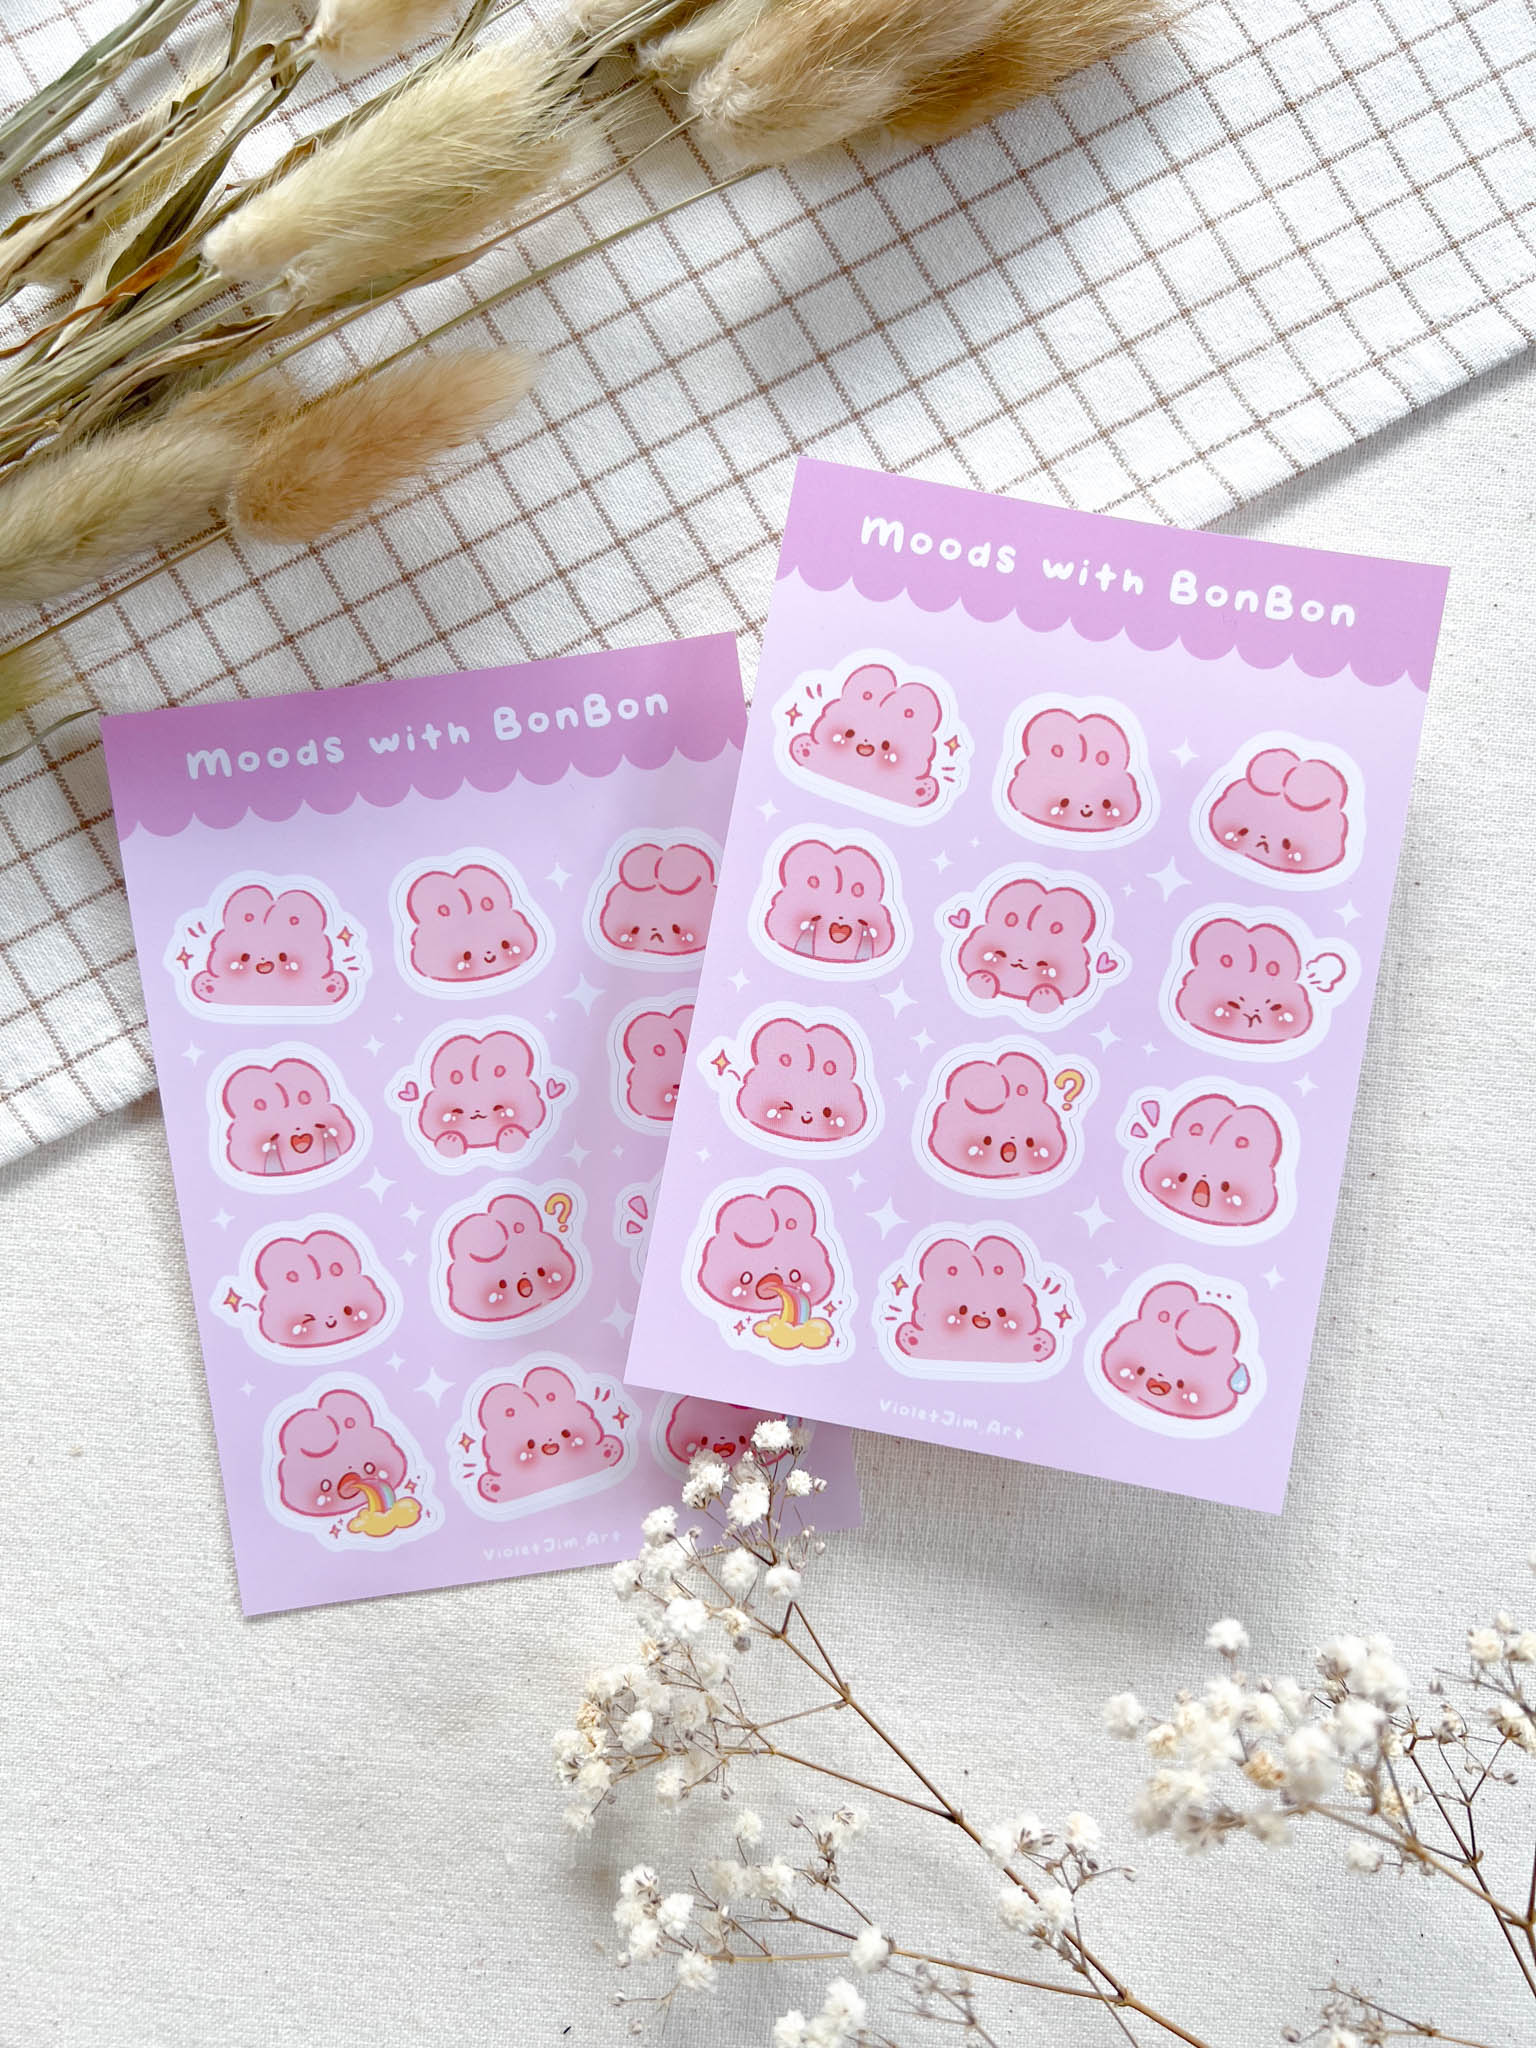 High-Quality Bunny Bonbon Mood Emoji Stickers - Funny Expressions - Matte Vinyl Sticker Sheet, Water-Resistant - A6 Size